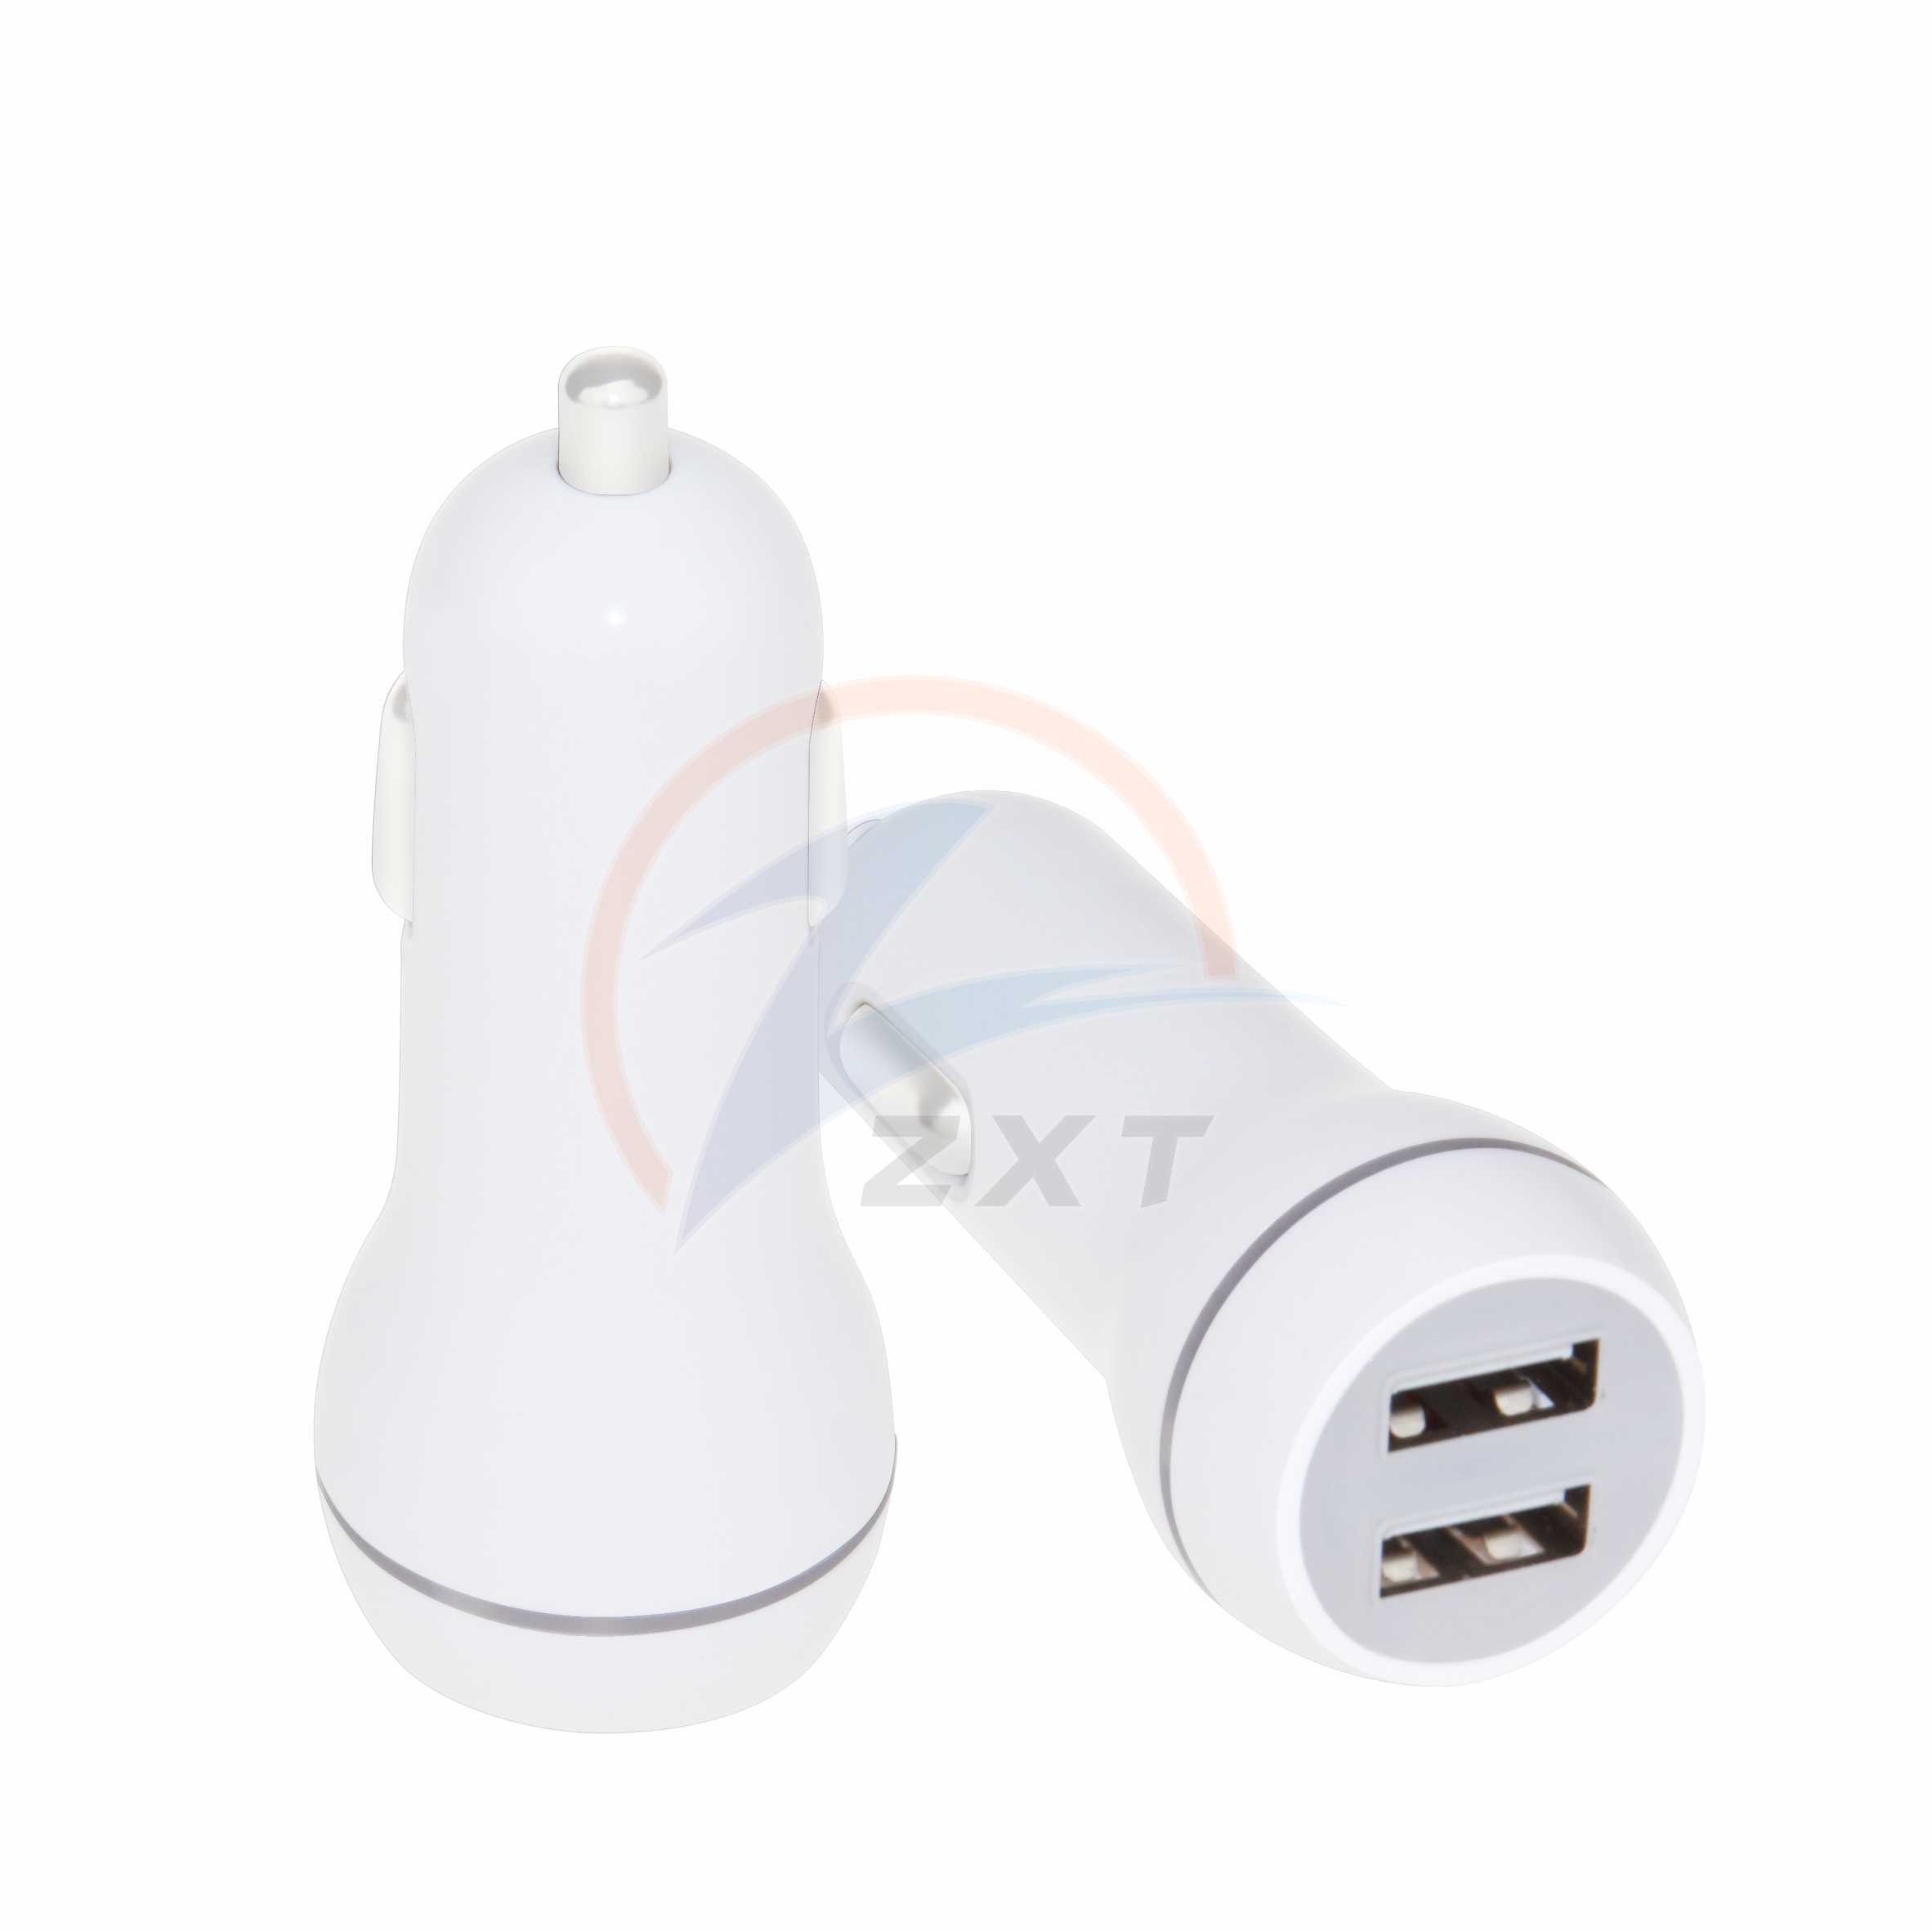 3.1A Dual Ports Car Charger